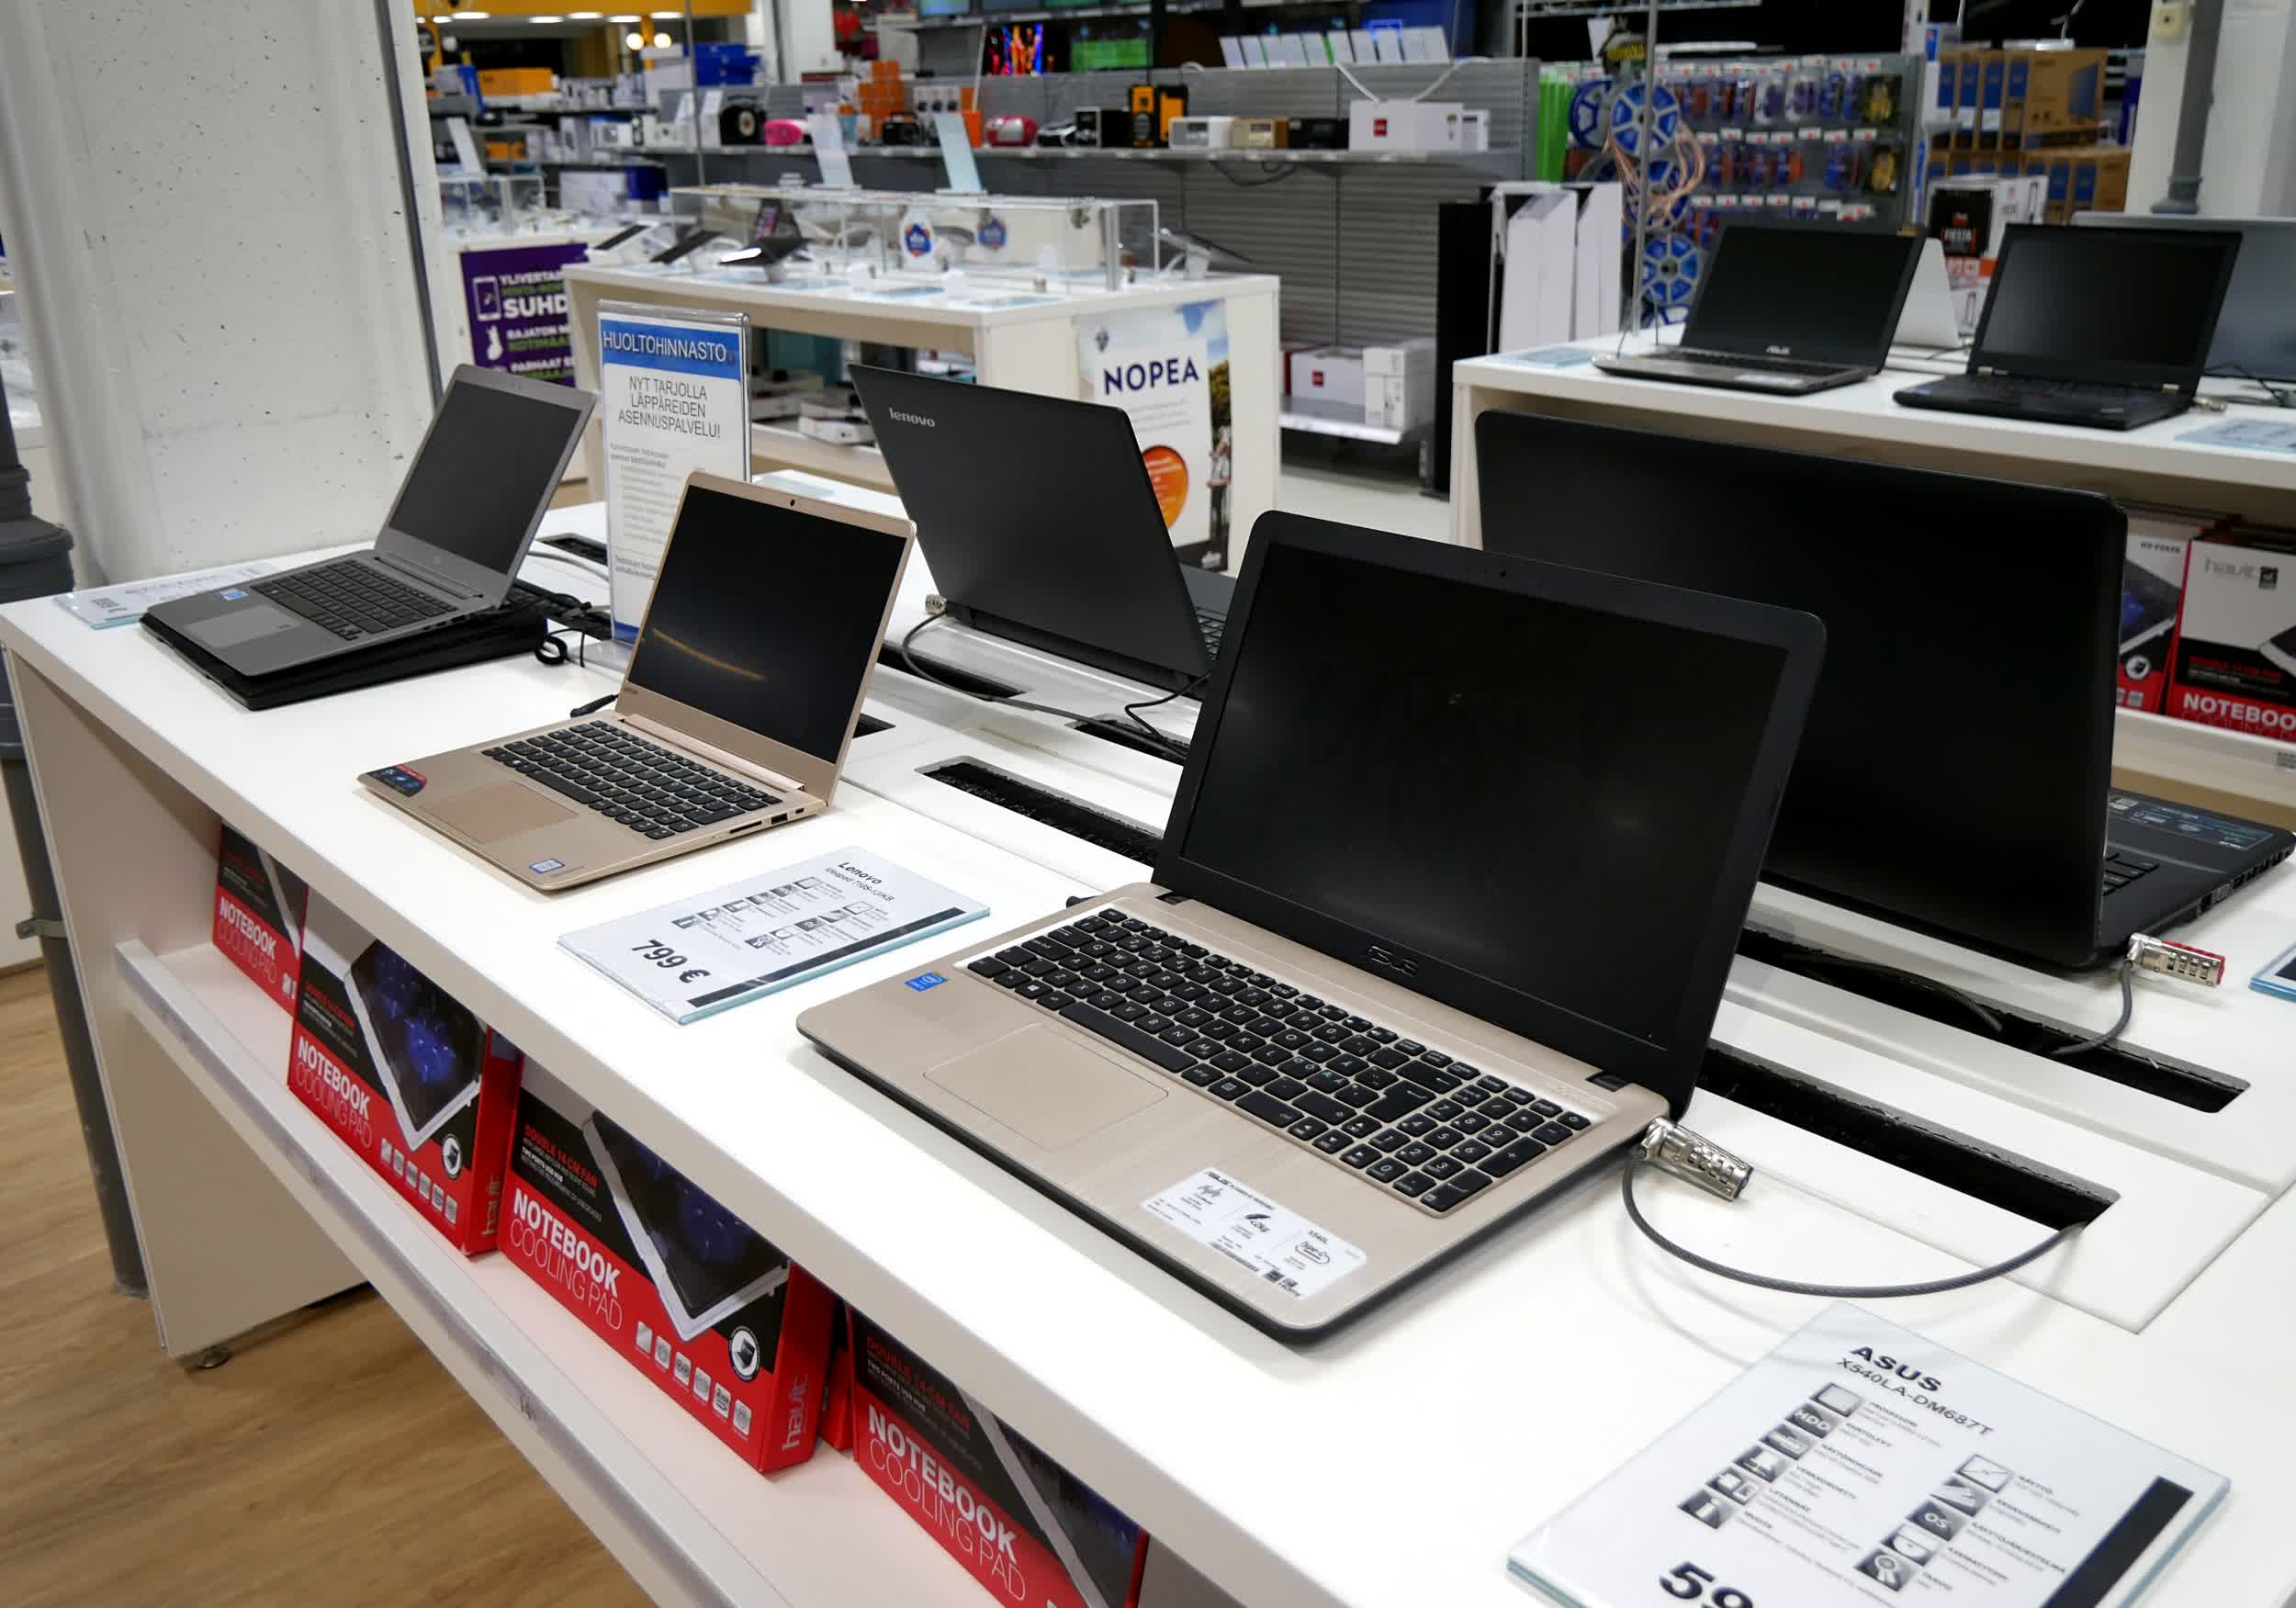 PC shipments in the US dipped 12% in Q3 despite attractive promotions